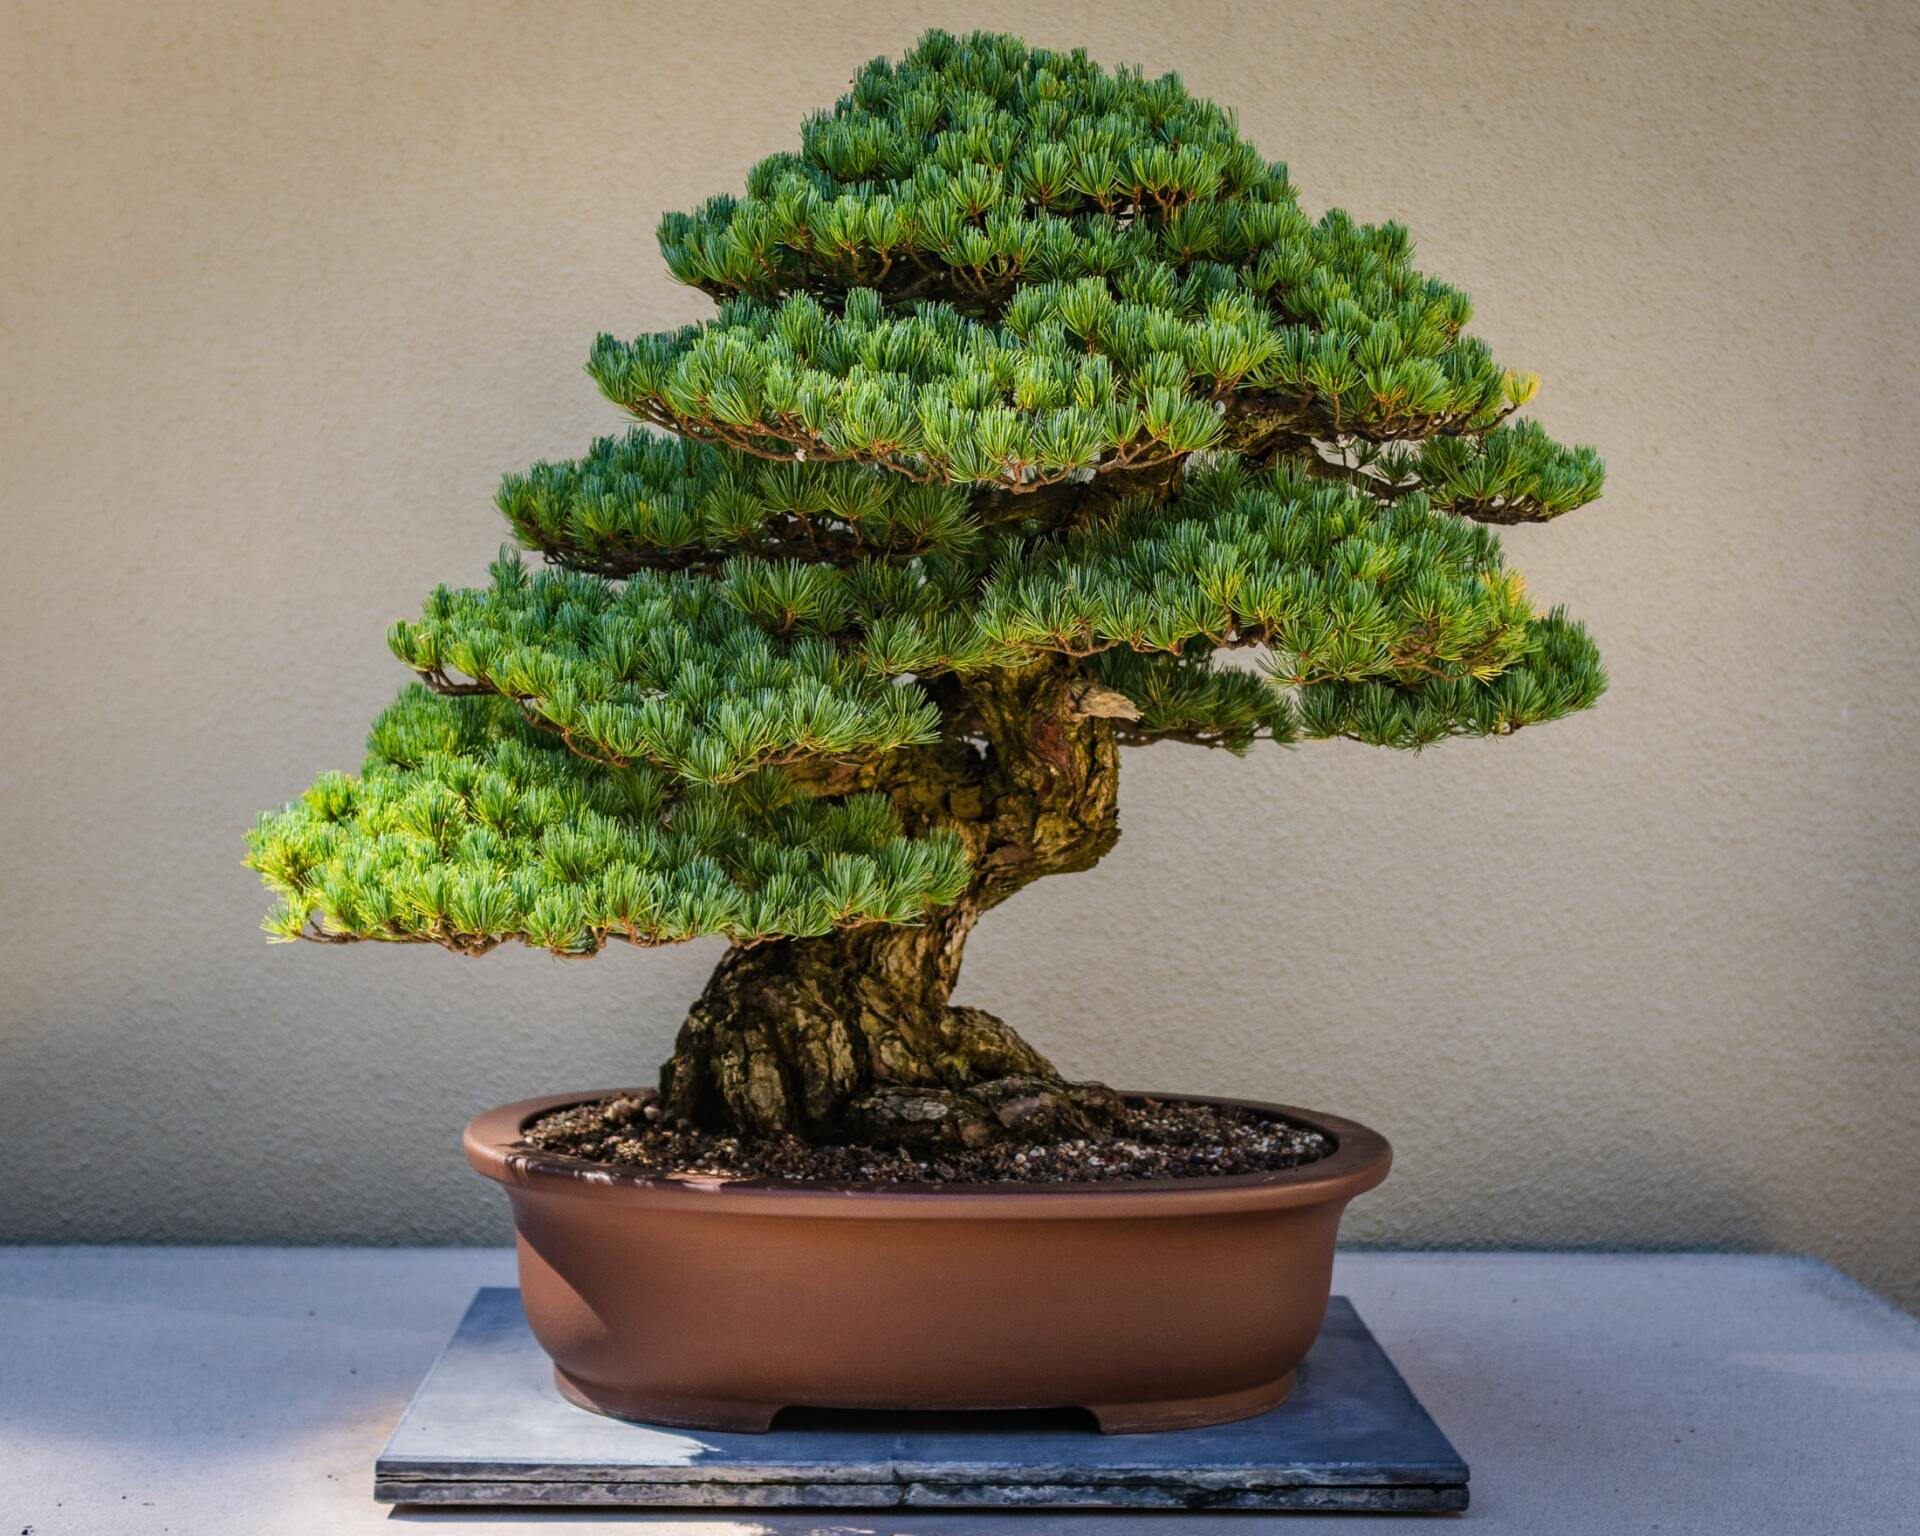 A beautiful evergreen bonsai tree rests center picture in a pot